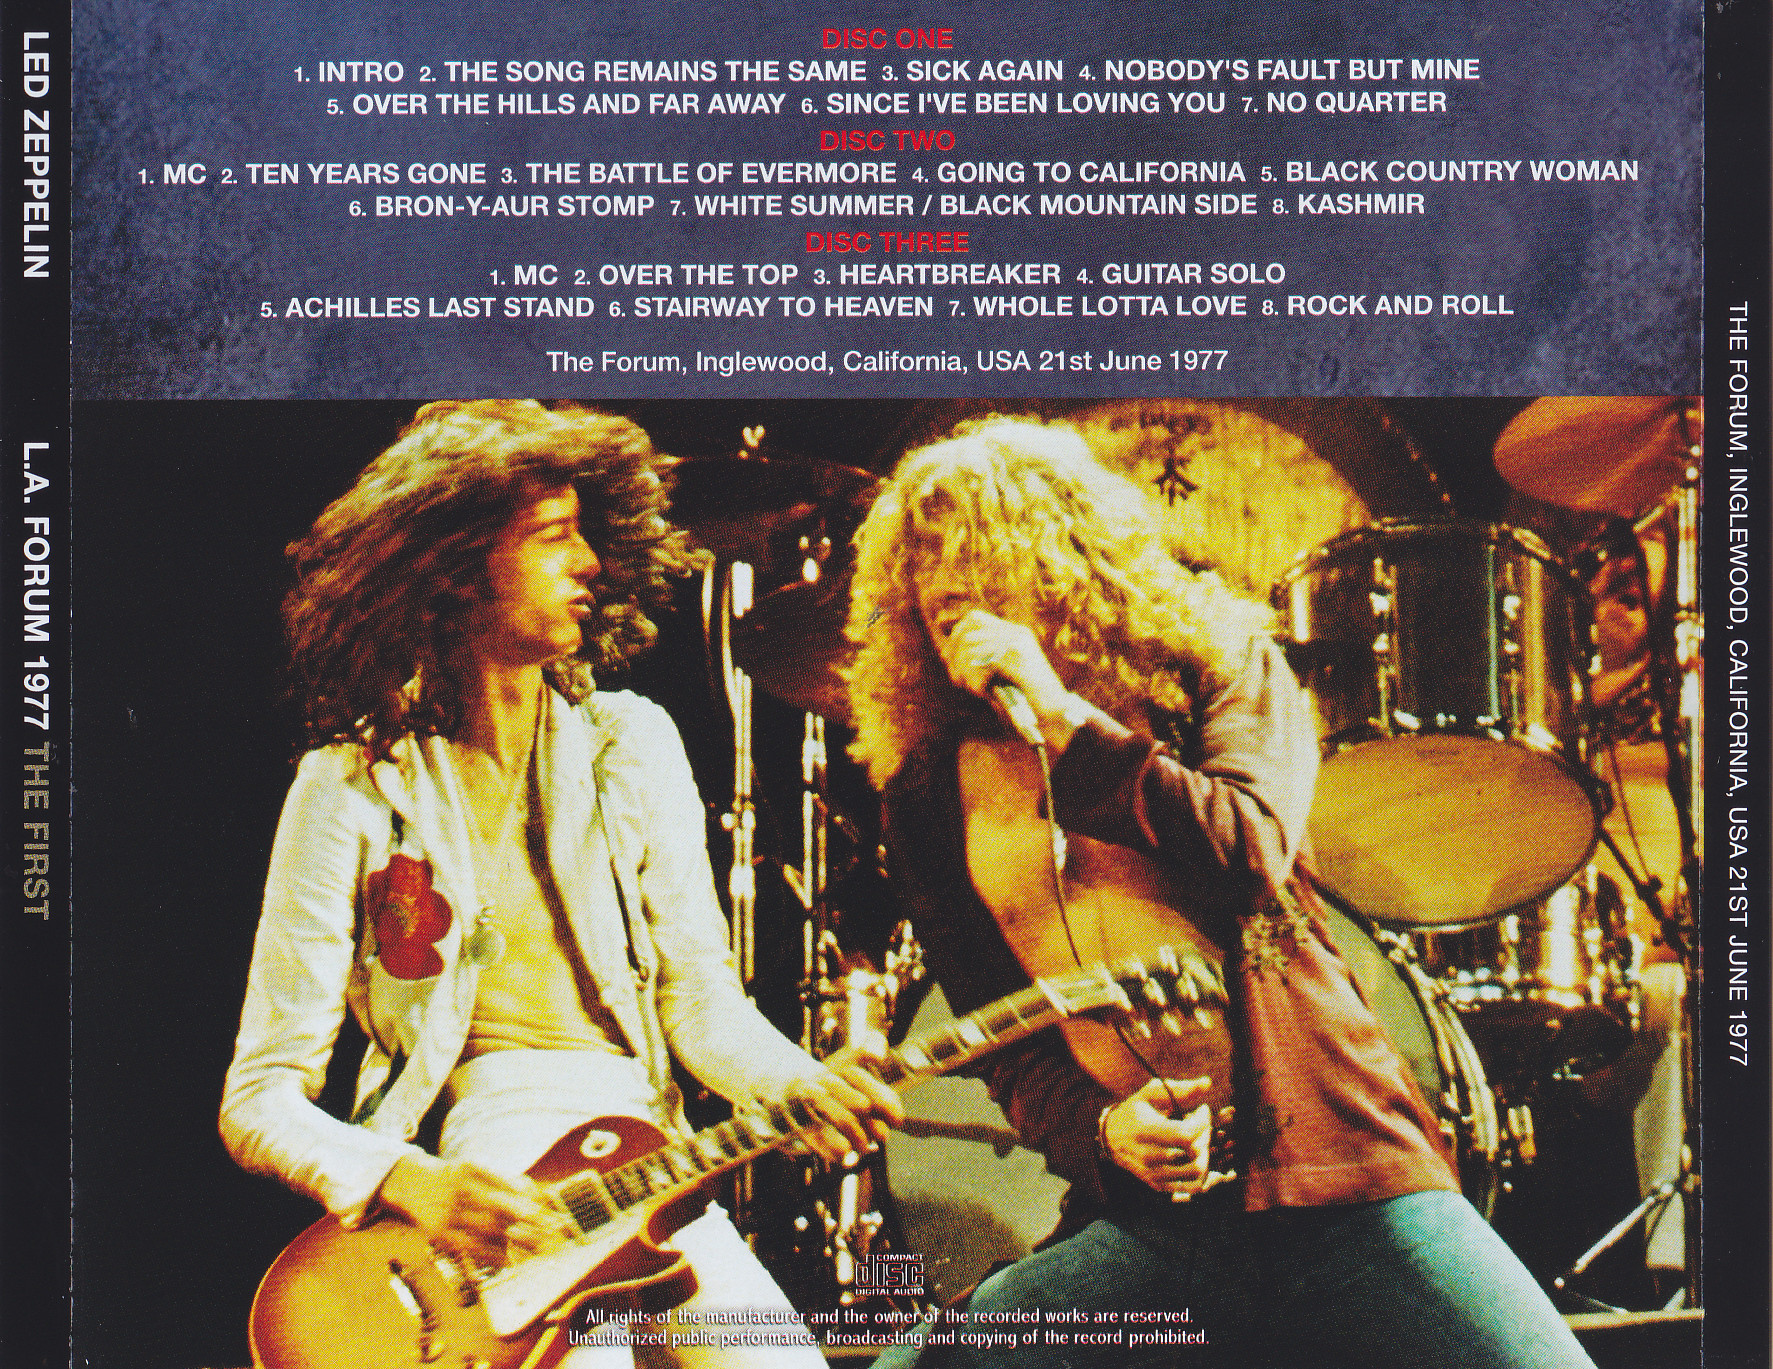 LED ZEPPELIN BACK TO THE L.A. FORUM 1977